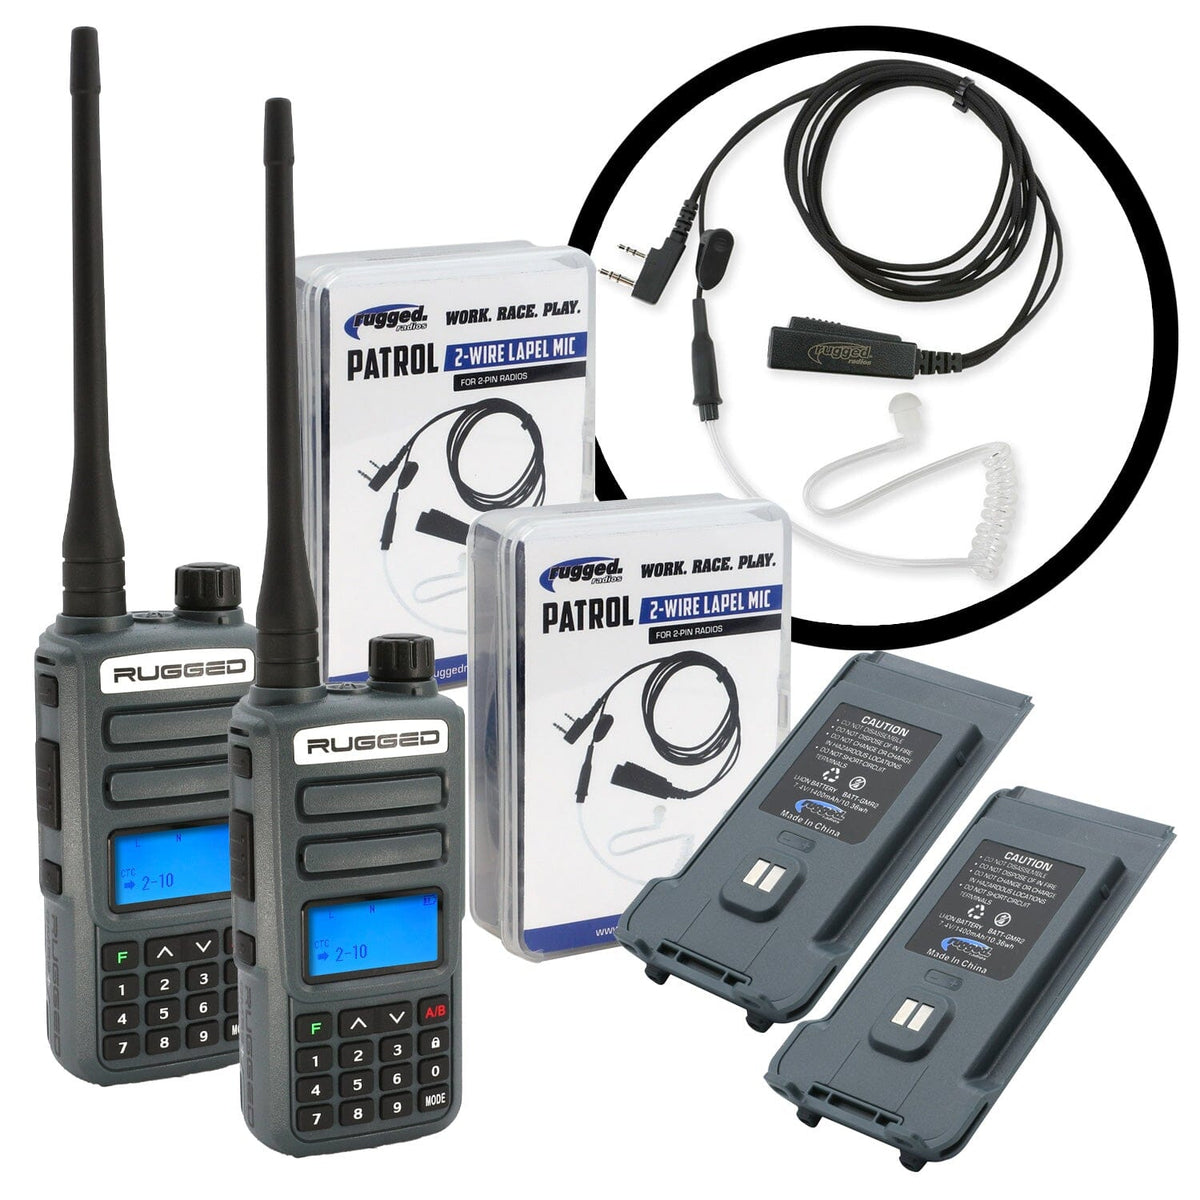 GREAT OUTDOORS PACK GMR2 PLUS GMRS and FRS Two Way Handheld Radios w –  Rugged Radios